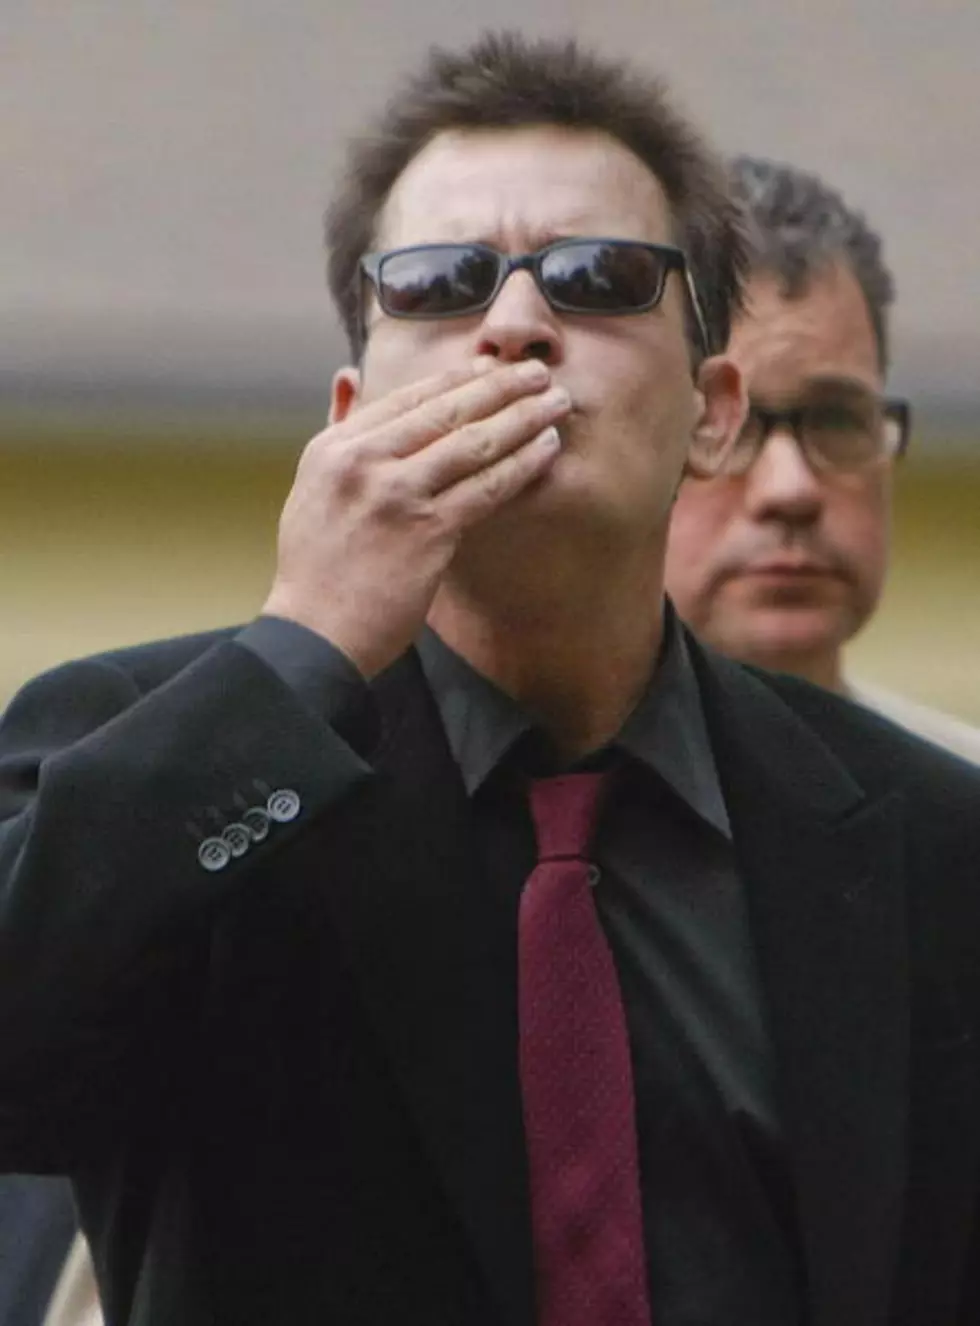 Charlie Sheen Opens Up About Life [VIDEO]